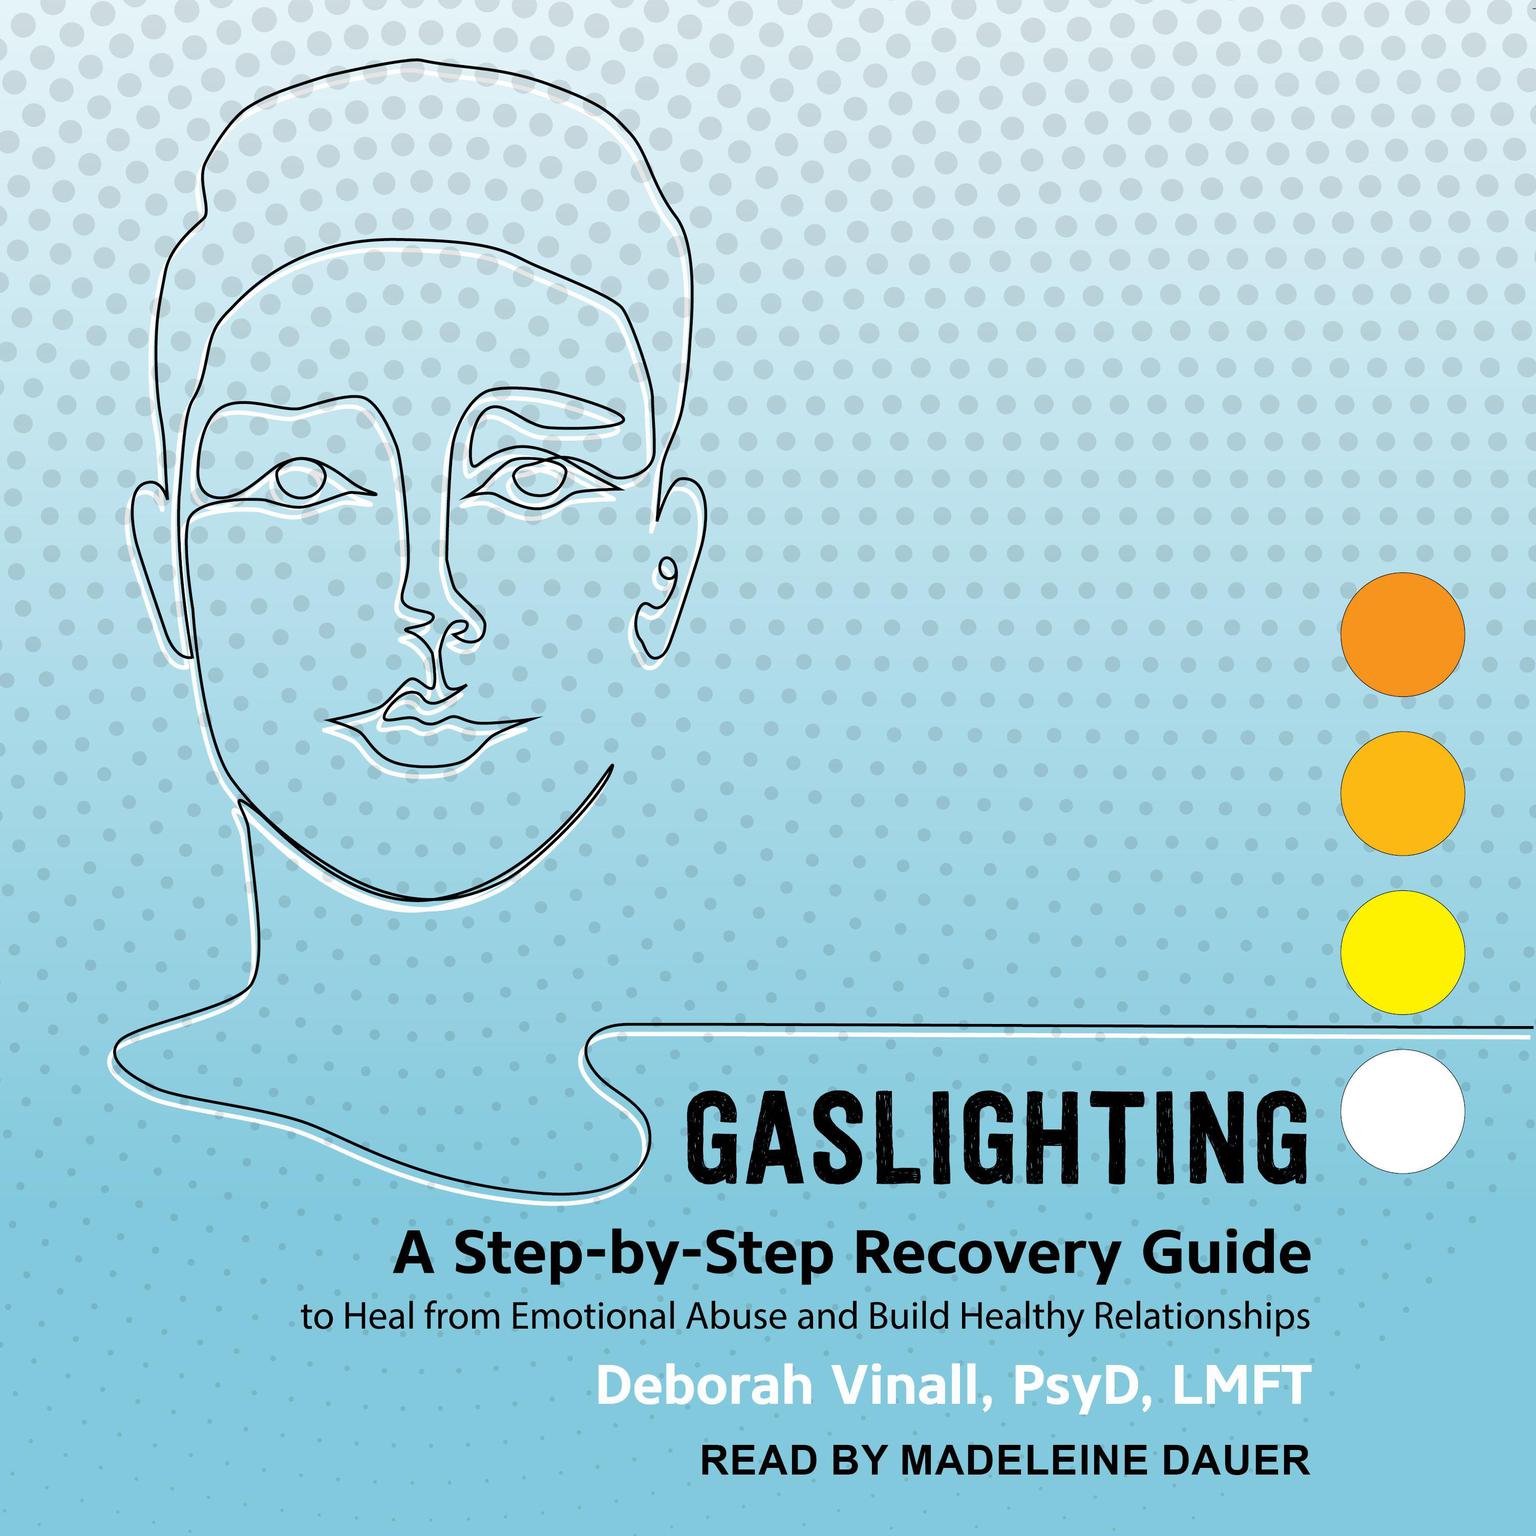 Gaslighting: A Step-by-Step Recovery Guide to Heal from Emotional Abuse and Build Healthy Relationships Audiobook, by Deborah Vinall